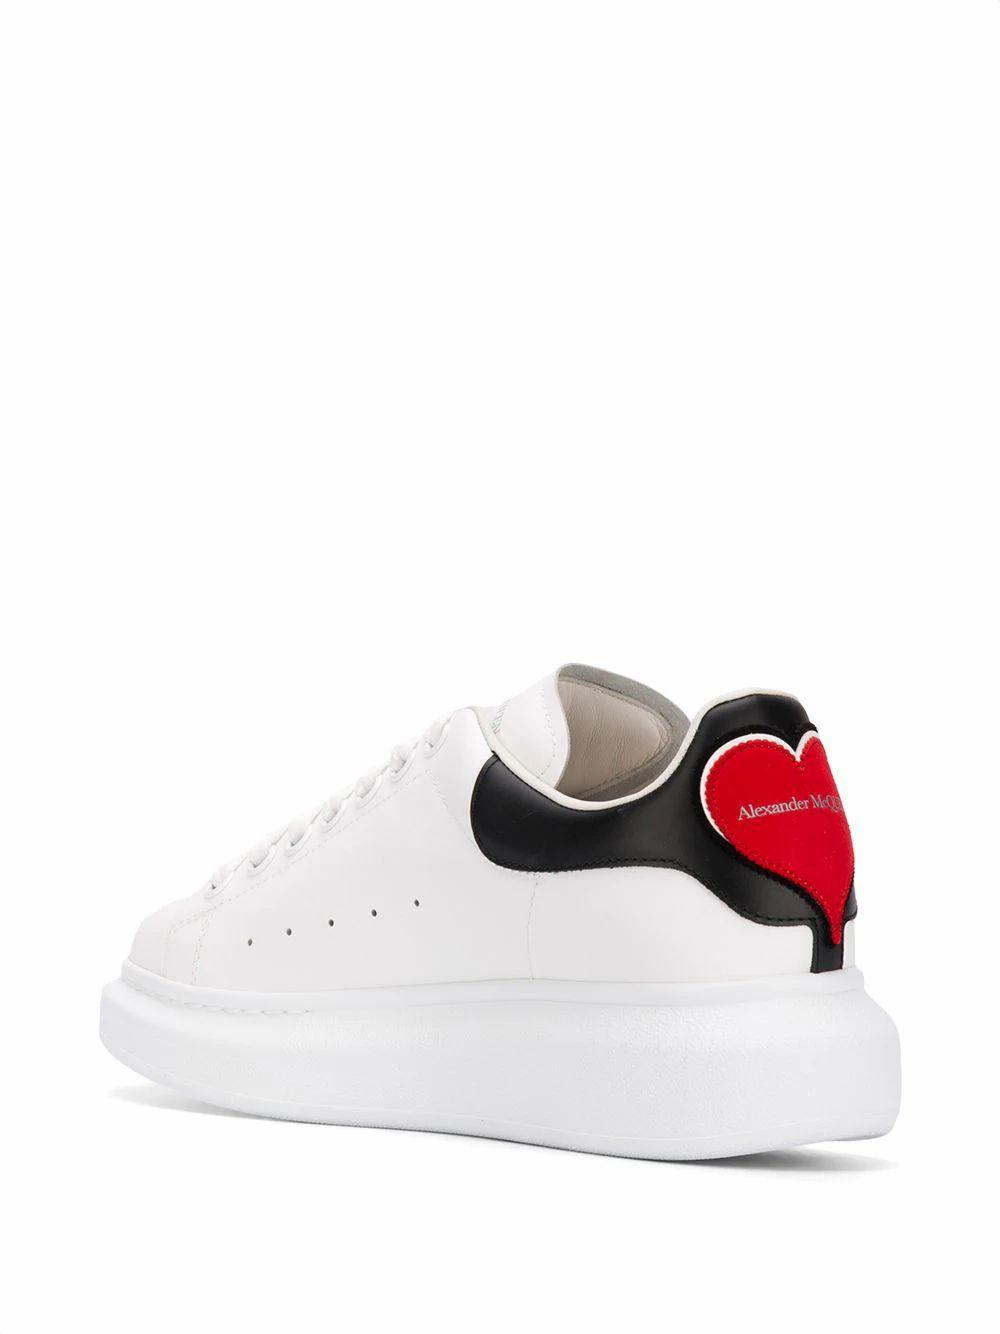 Alexander McQueen Leather Oversized Heart Patch Sneakers in White | Lyst